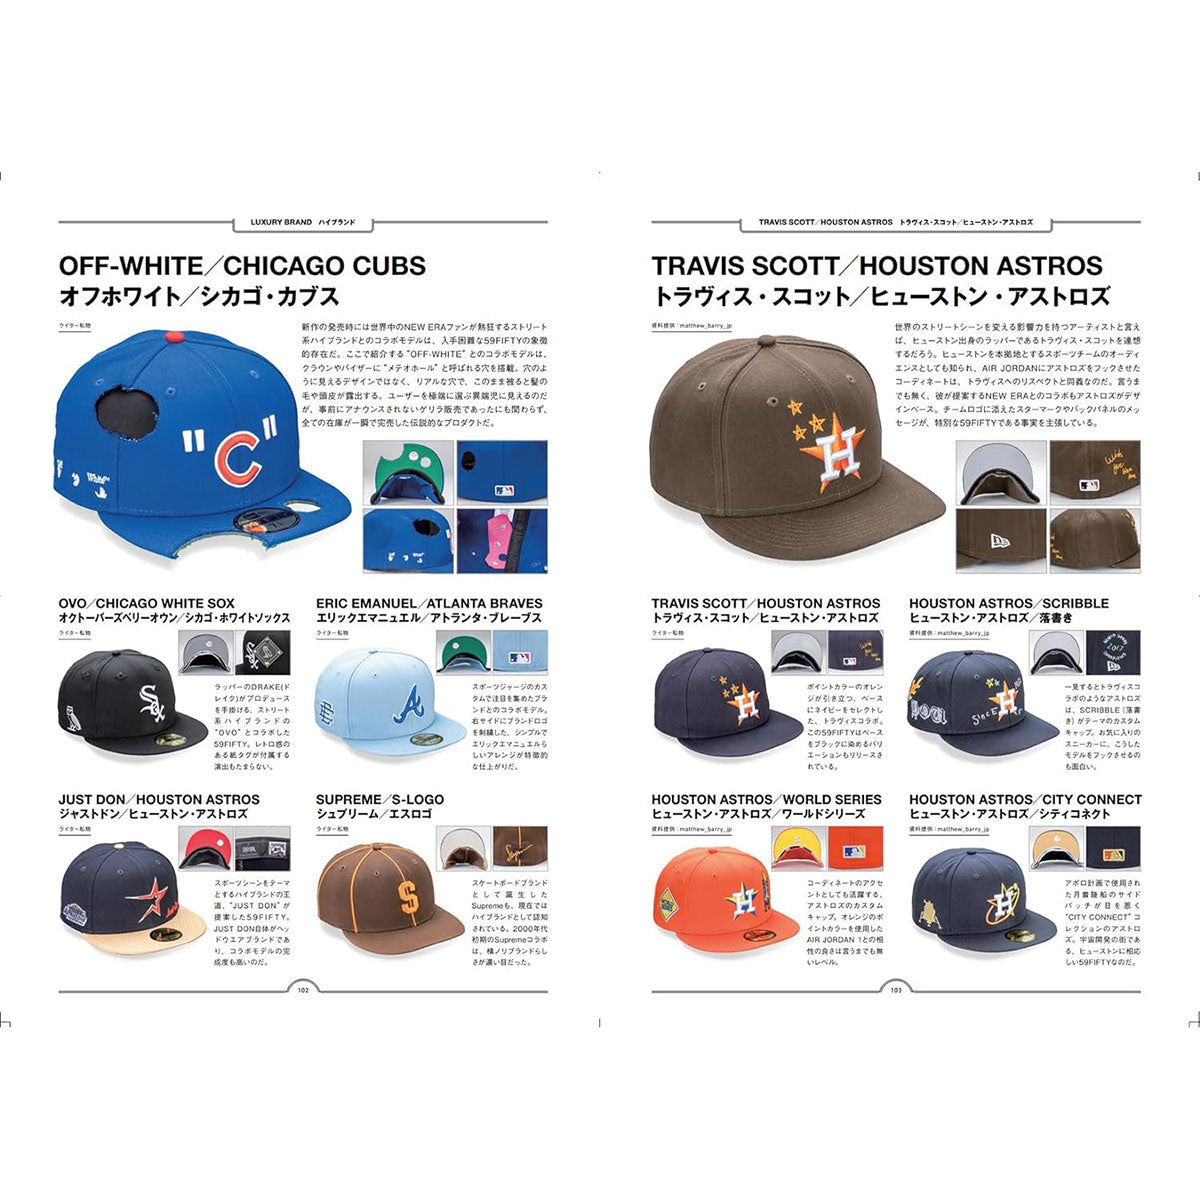 NEW ERA 59FIFTY COLLECTION BOOK